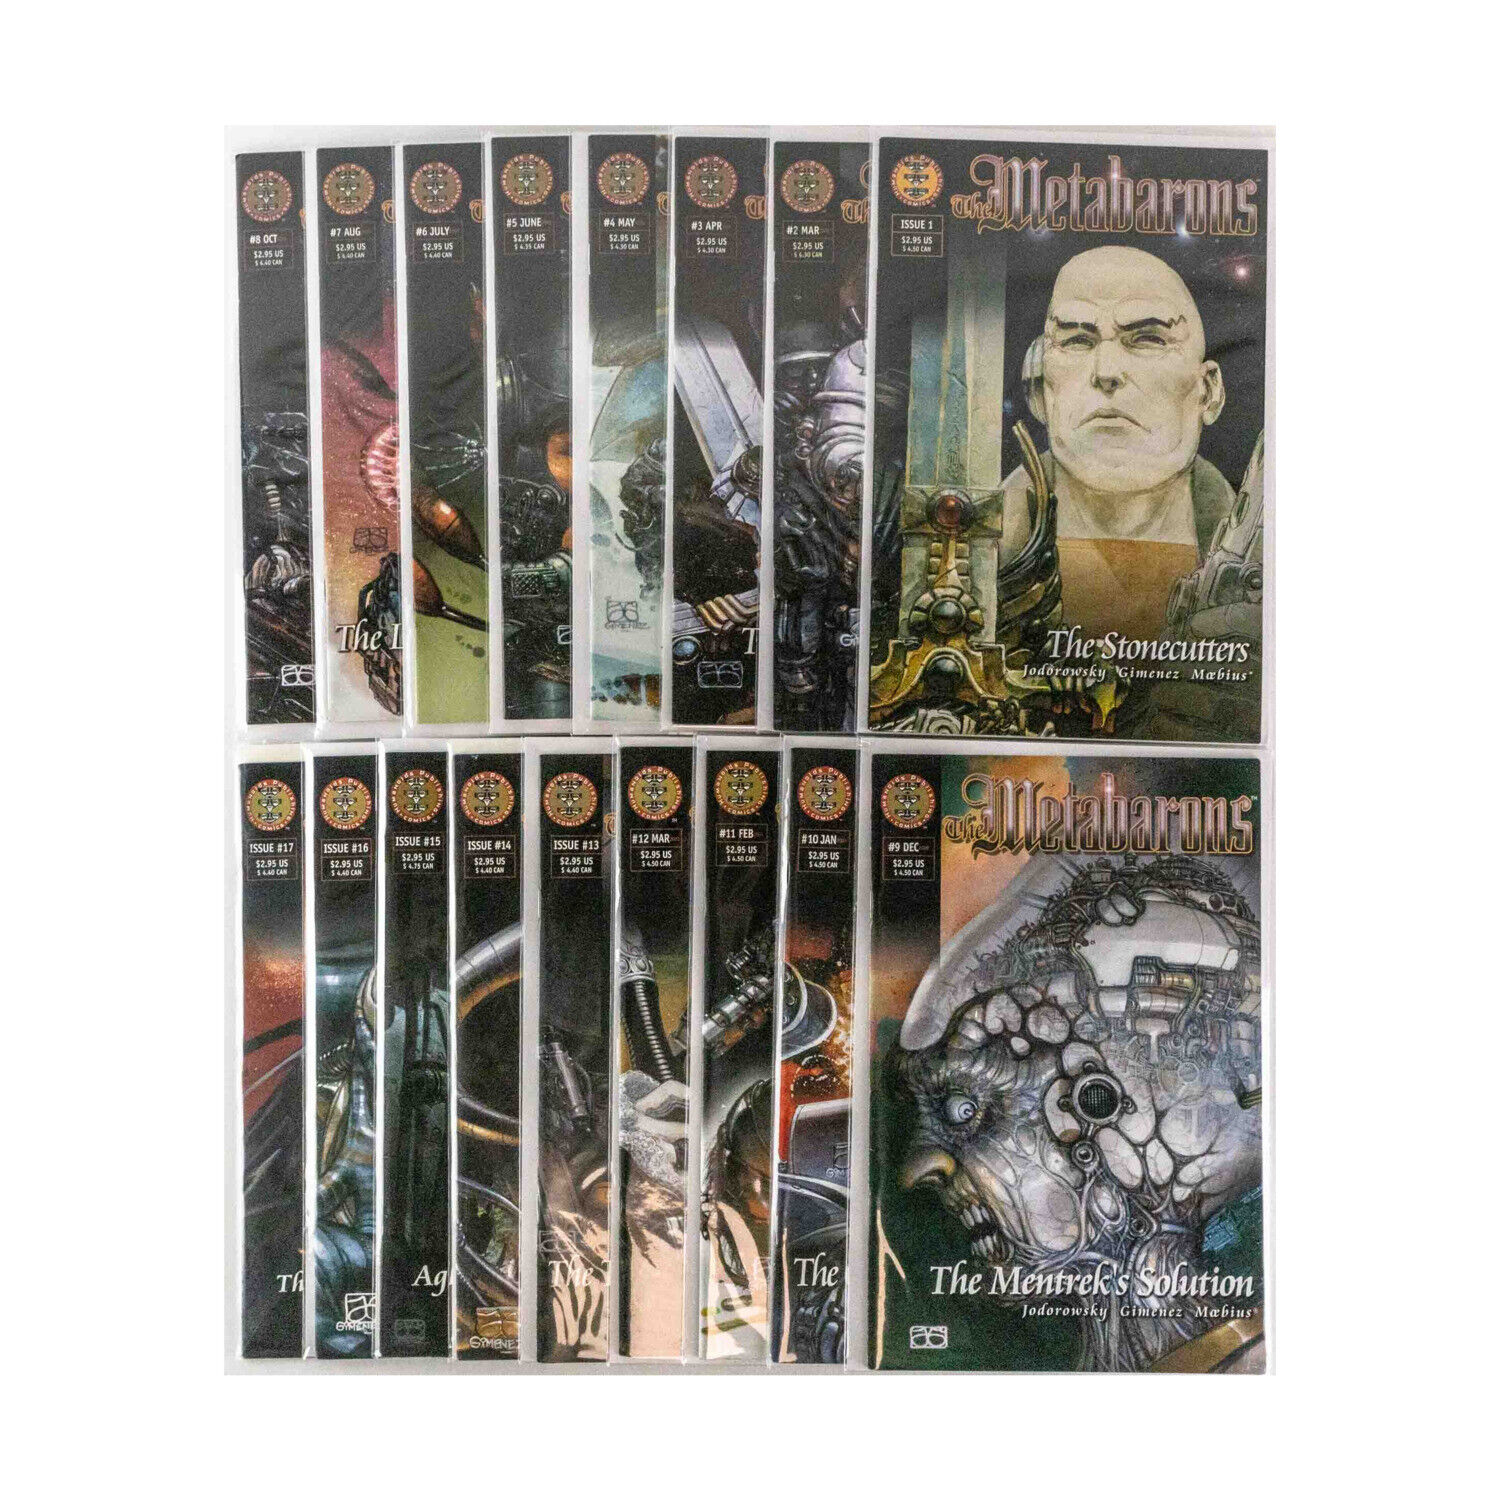 Humanoids Pub Comic Metabarons Complete Collection - Issues #1-17 EX